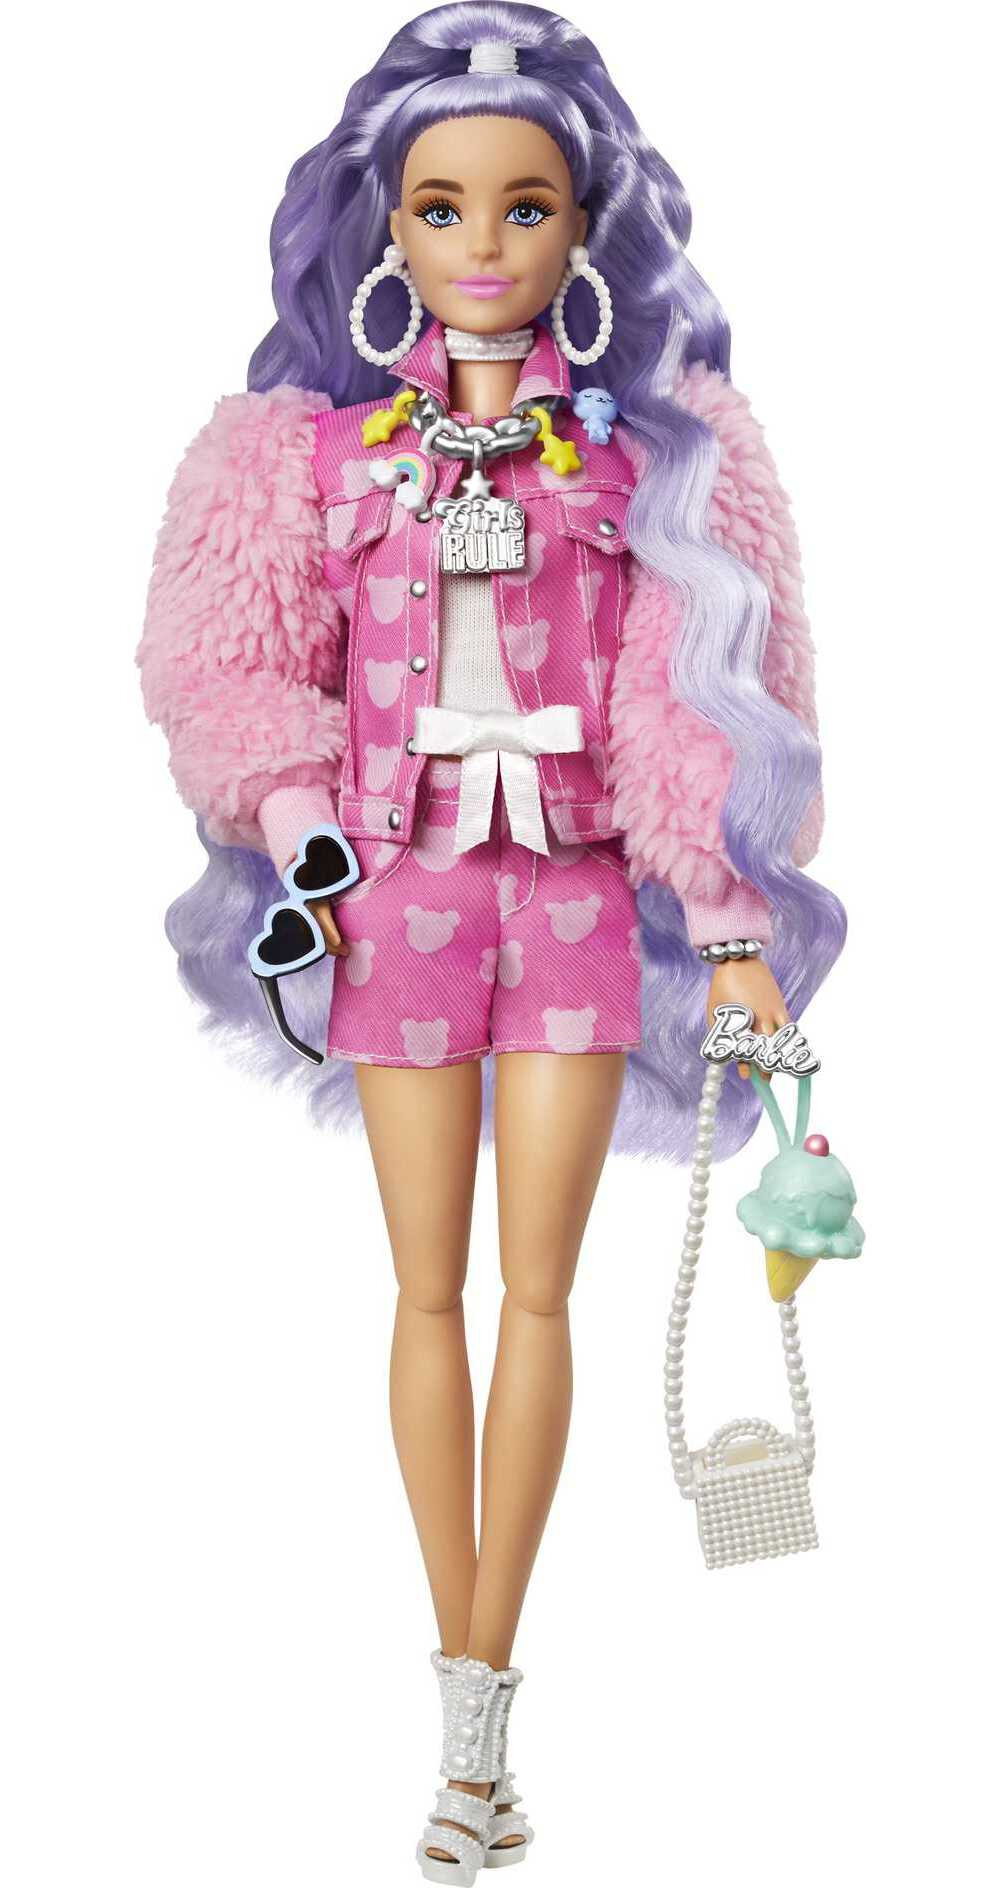 Barbie Extra Fashion Doll with Periwinkle Hair in Denim Jacket & Shorts with Accessories & Pet - image 1 of 7